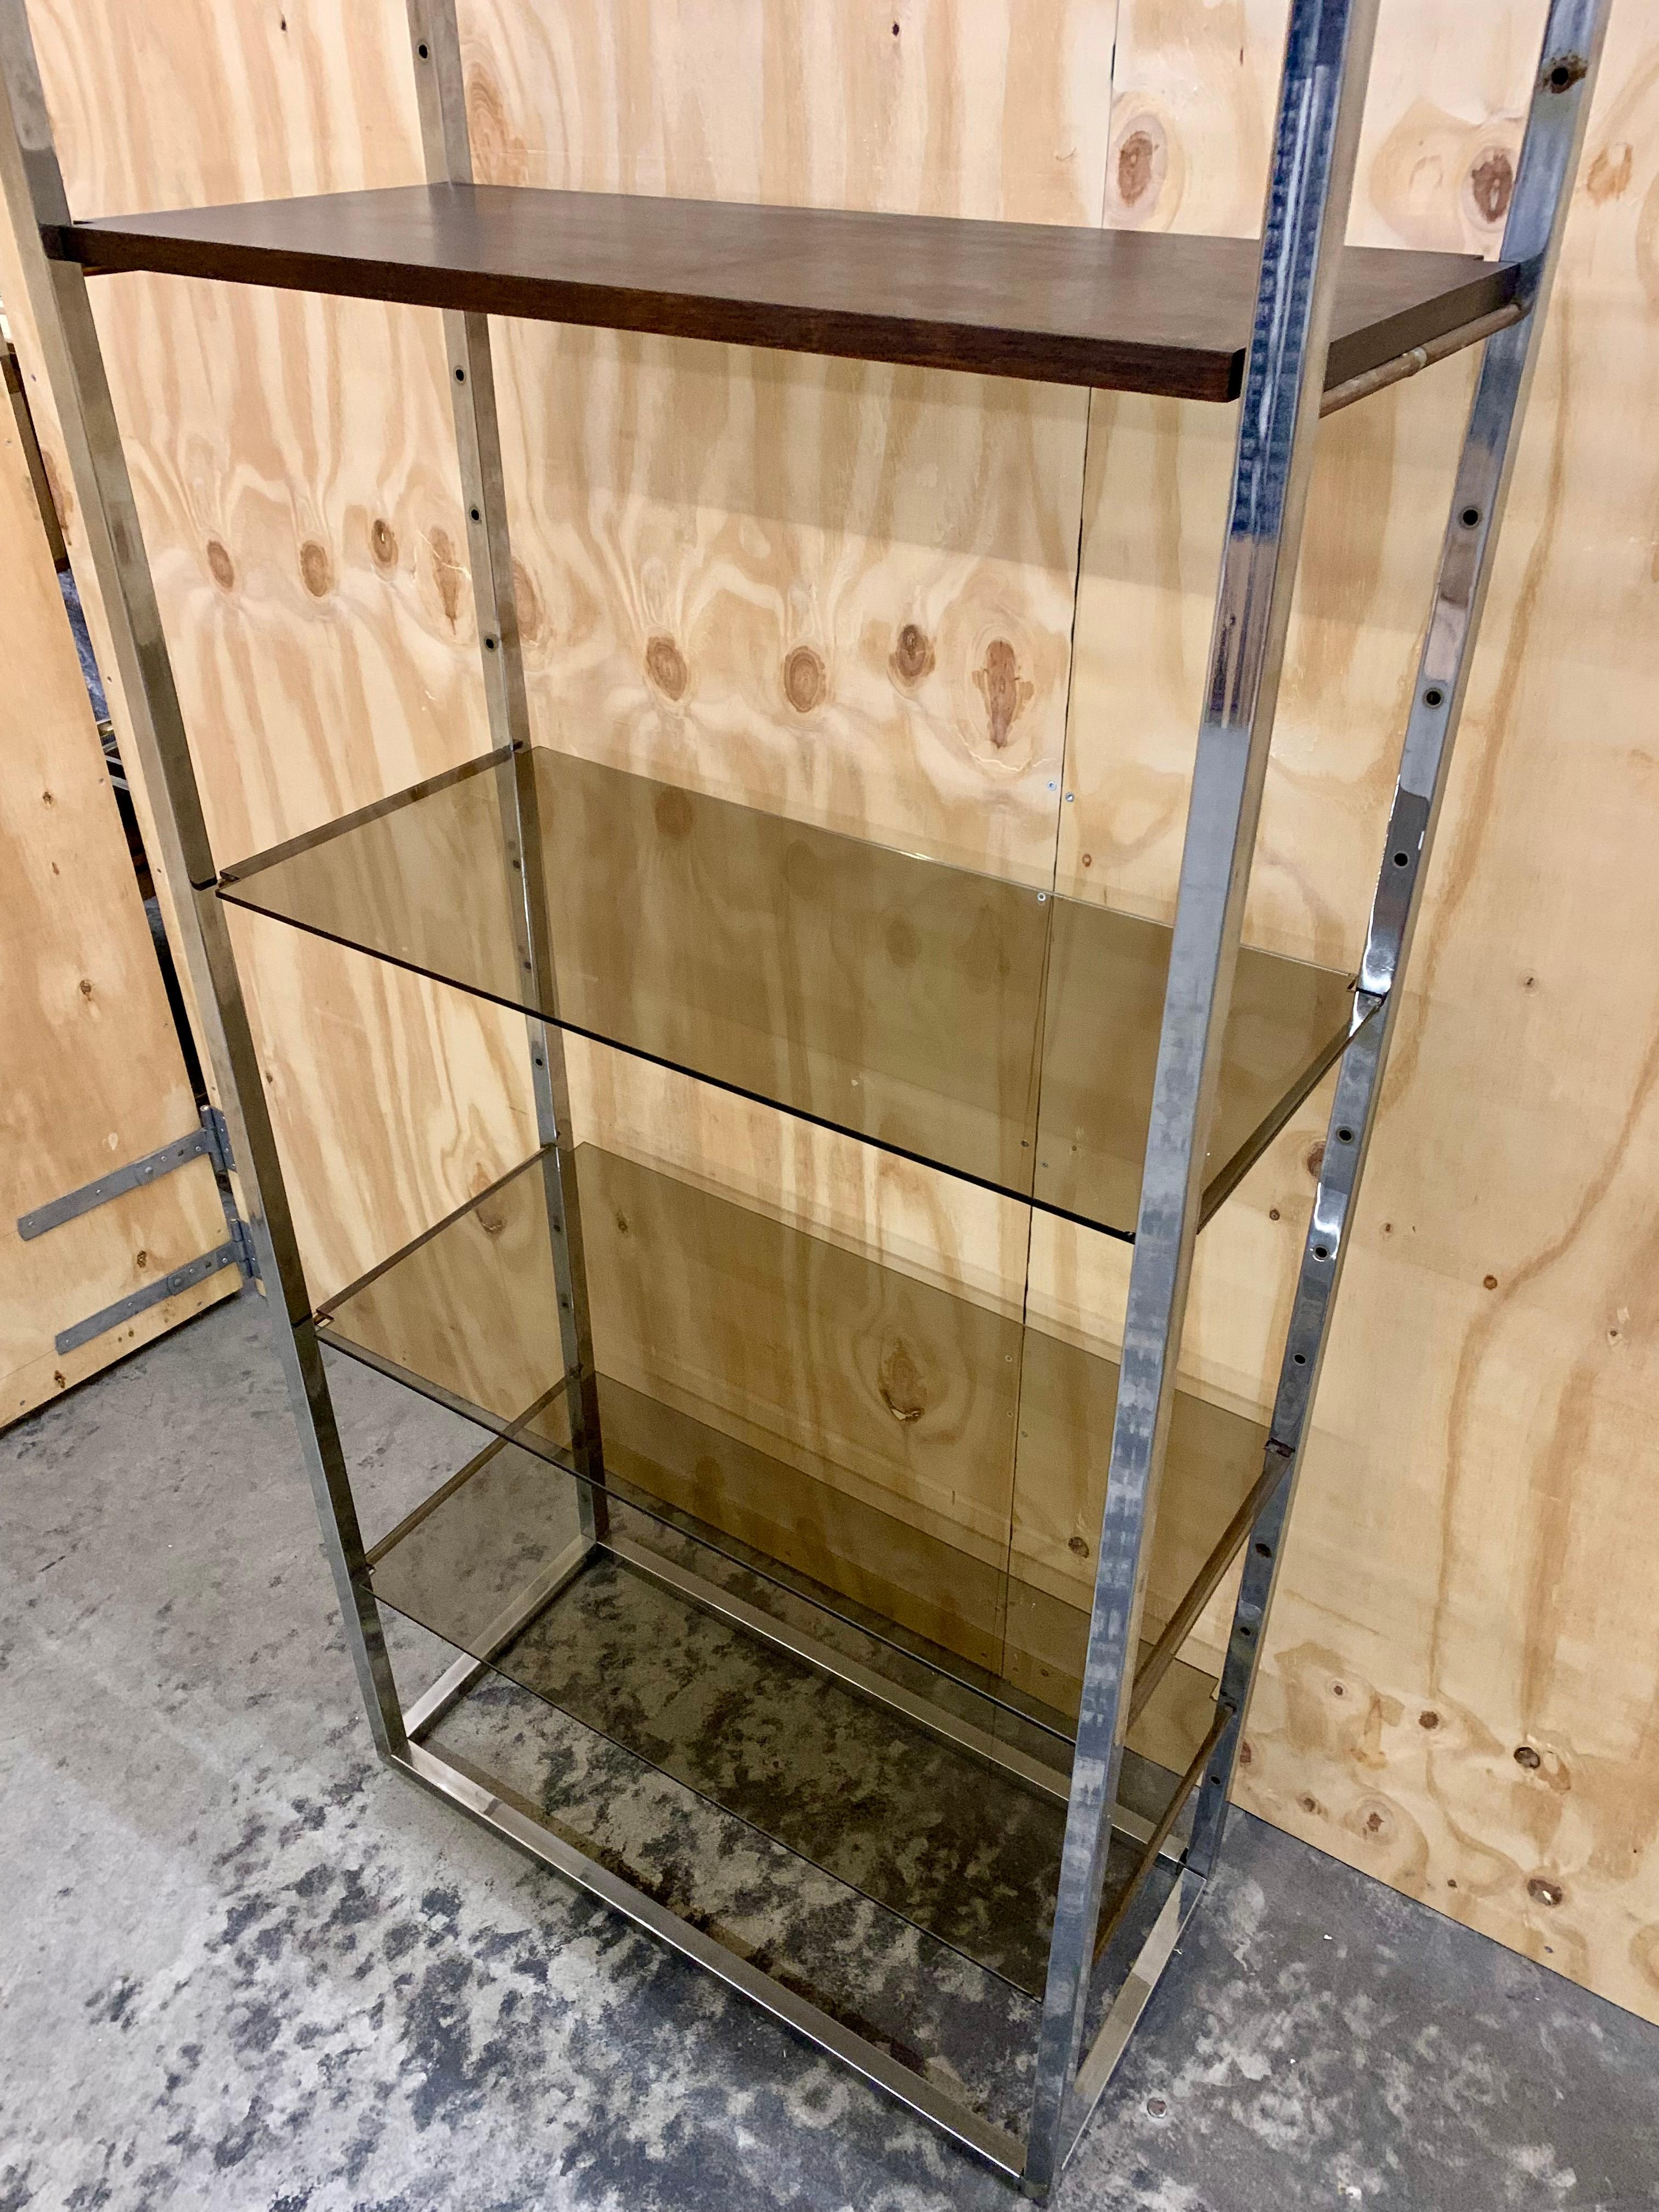 Cool vintage tall chrome book case from 1960-1970s. There are 4 smoke colored glass shelves and 1 wooden shelf, all movable, in each book case. At the moment we have 4 pieces on stock at our remote warehouse.

Price is pr. book case